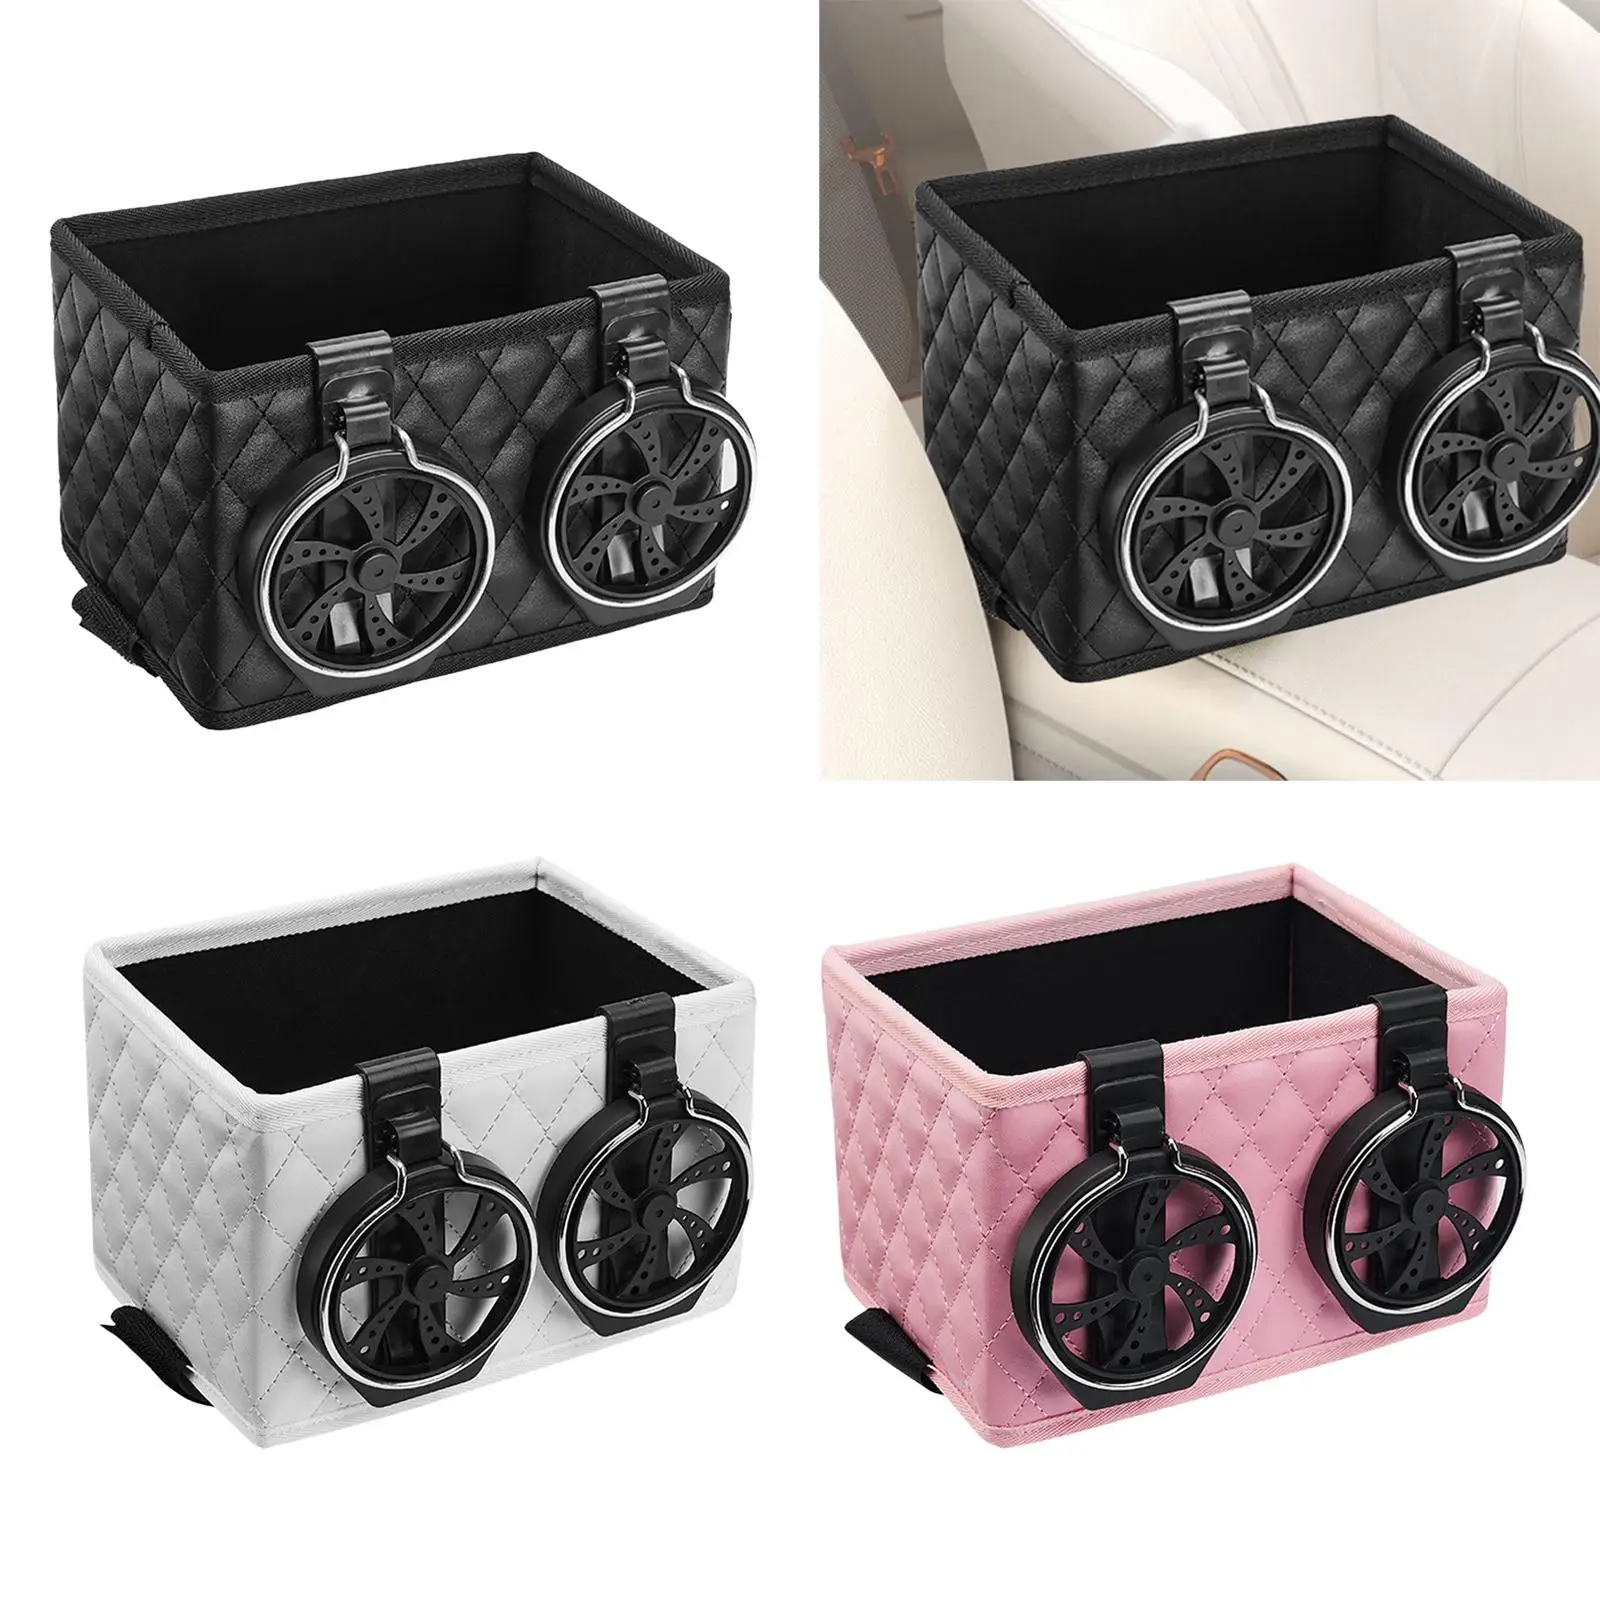 Water Cup Holder Gadgets Holder 2 in 1 Car Storage Box for Paper Towels